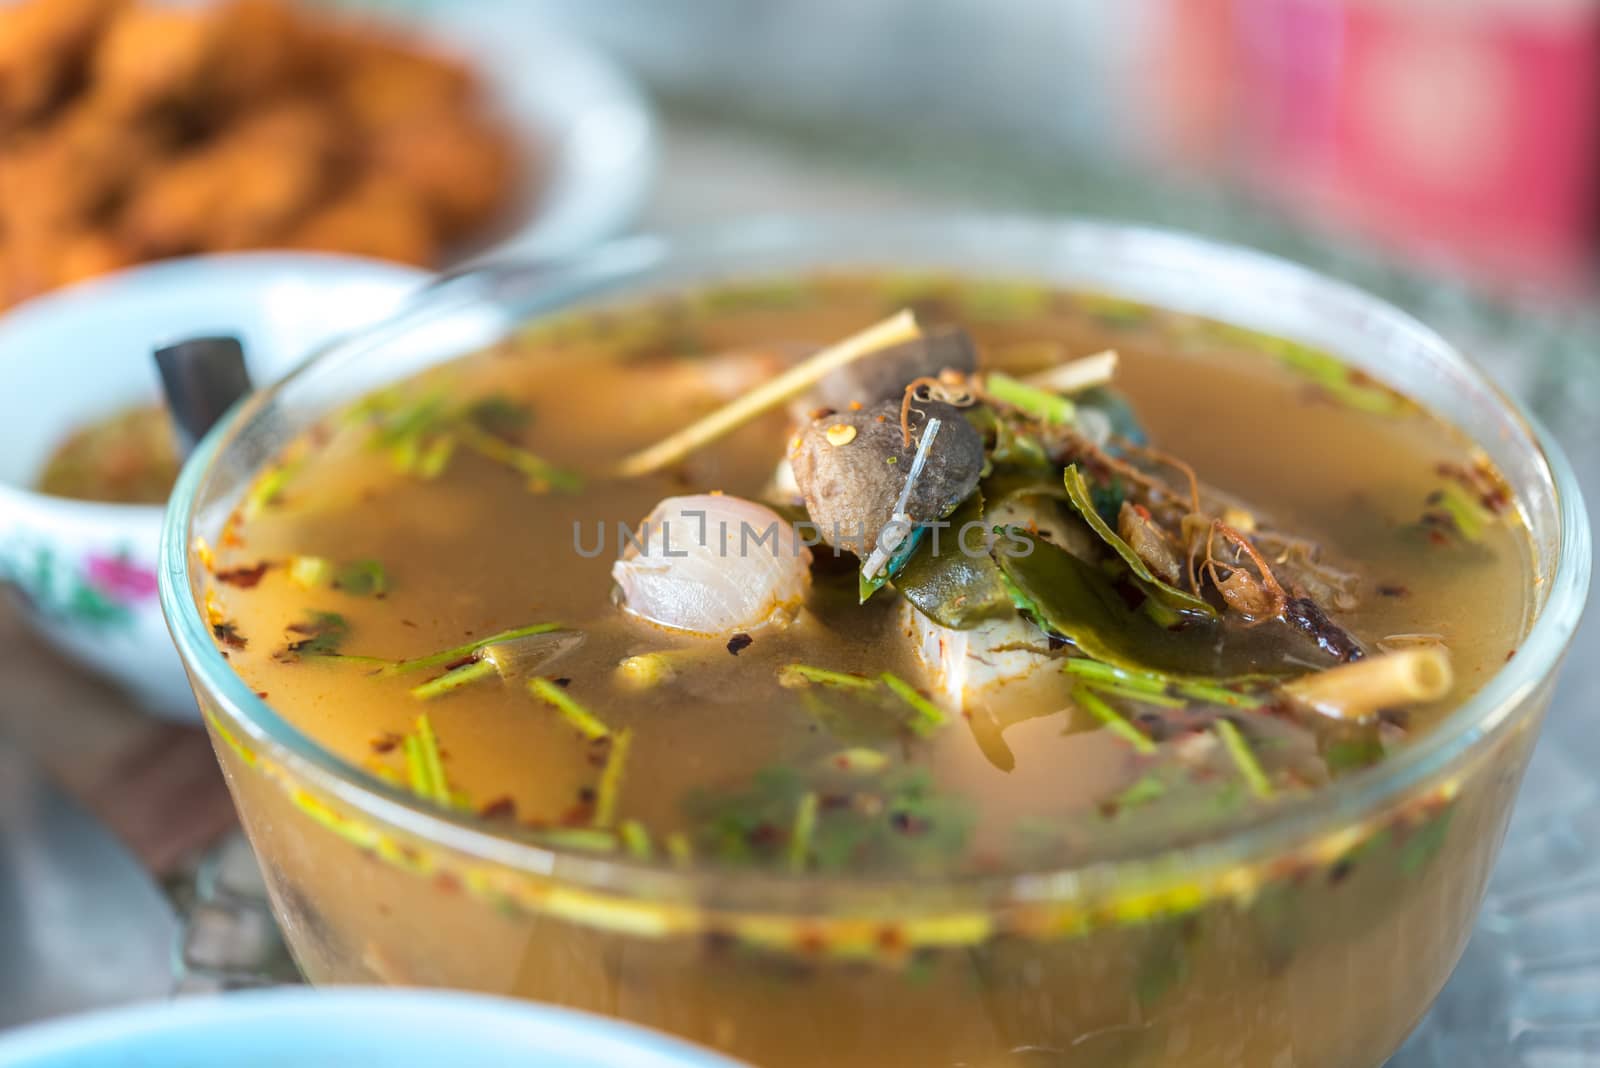 Hot and sour seafood soup (Tom Yum) for sale at Thai street food market or restaurant in Thailand